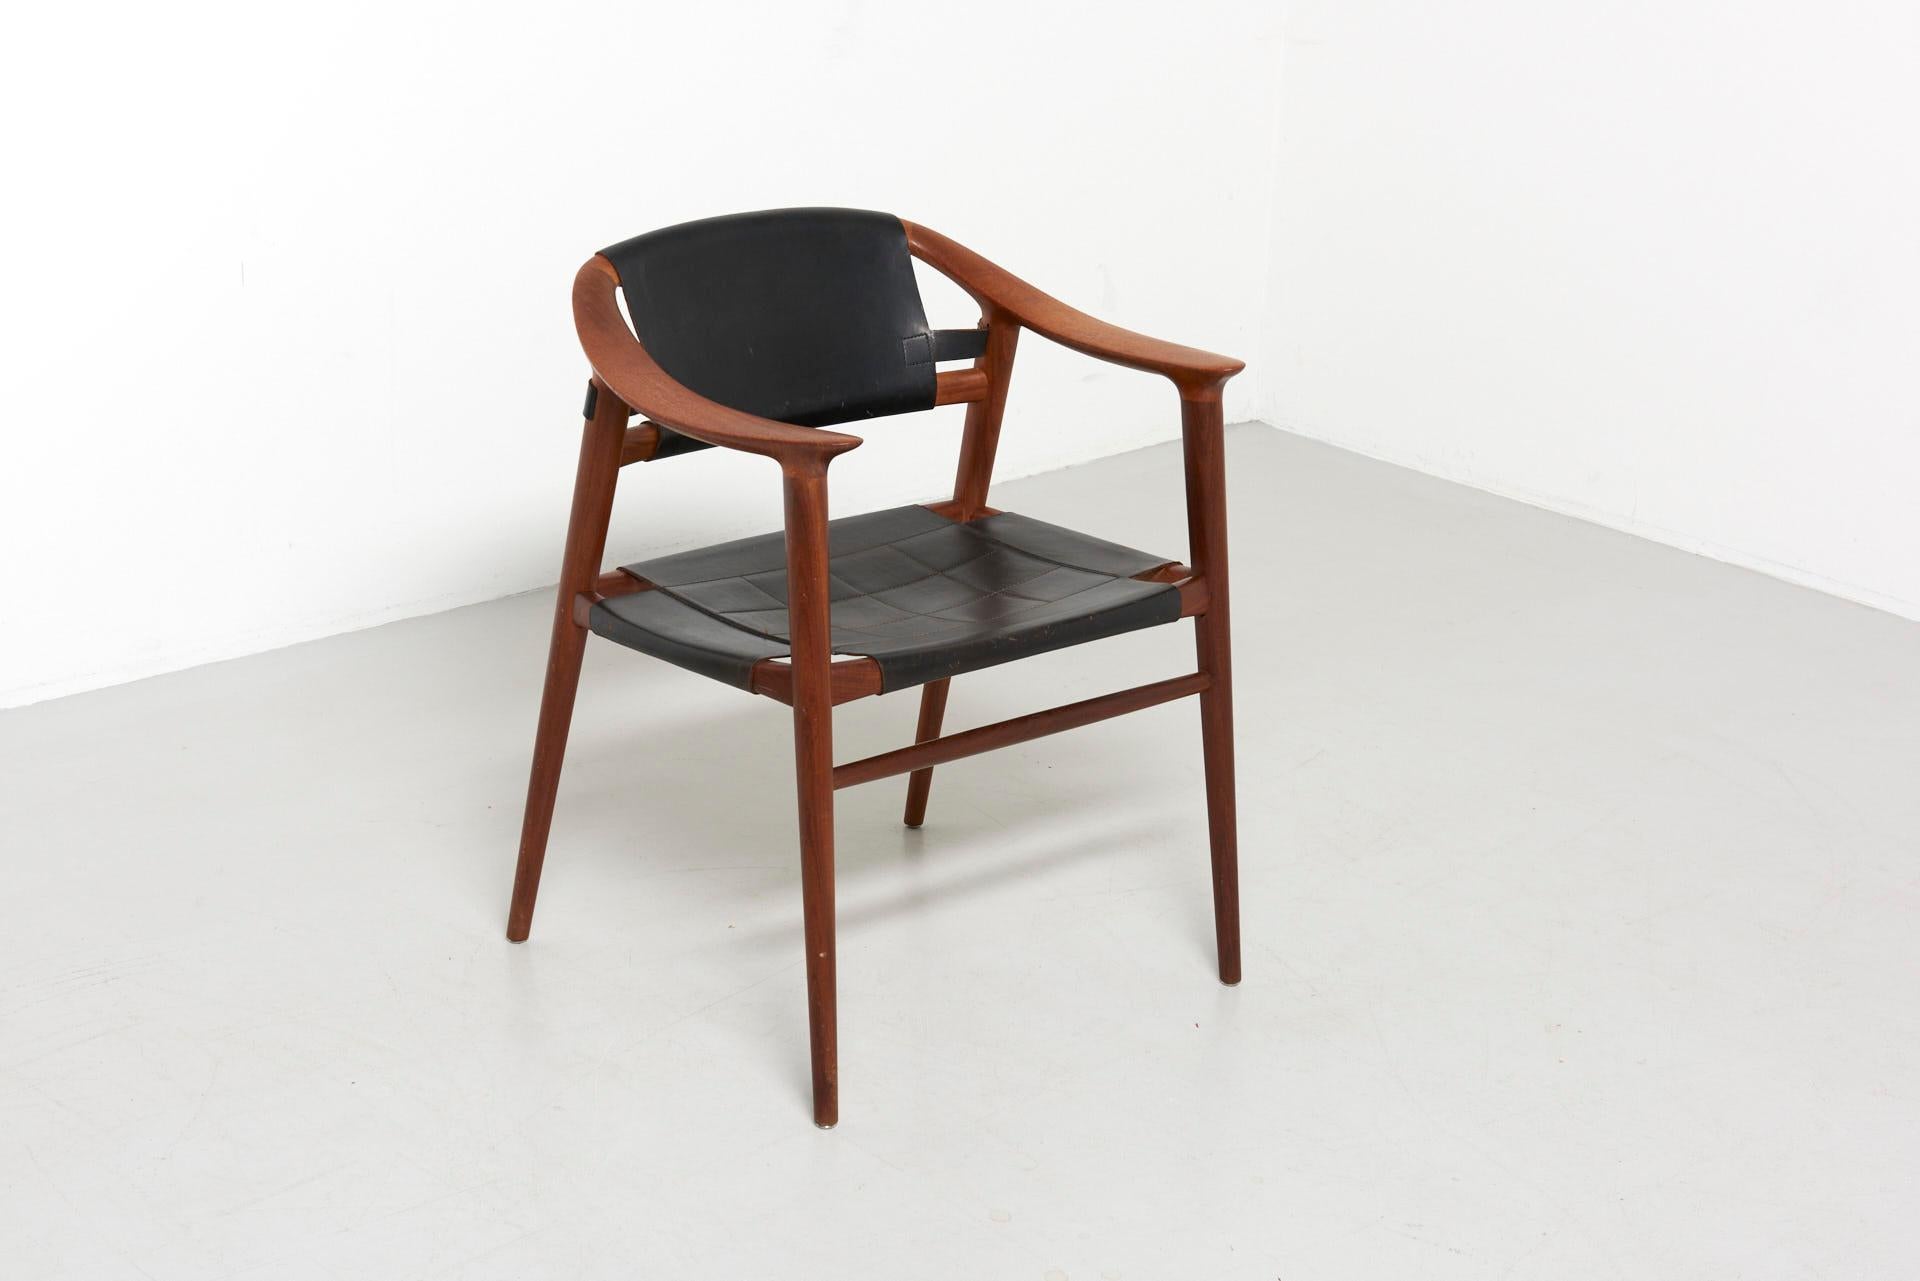 A rare 'Bambi' armchair designed by Rolf Rastad and Adolf Relling in Norway in the 1950s. Solid teak with black saddle leather. Made by Gustav Bahus in Norway.